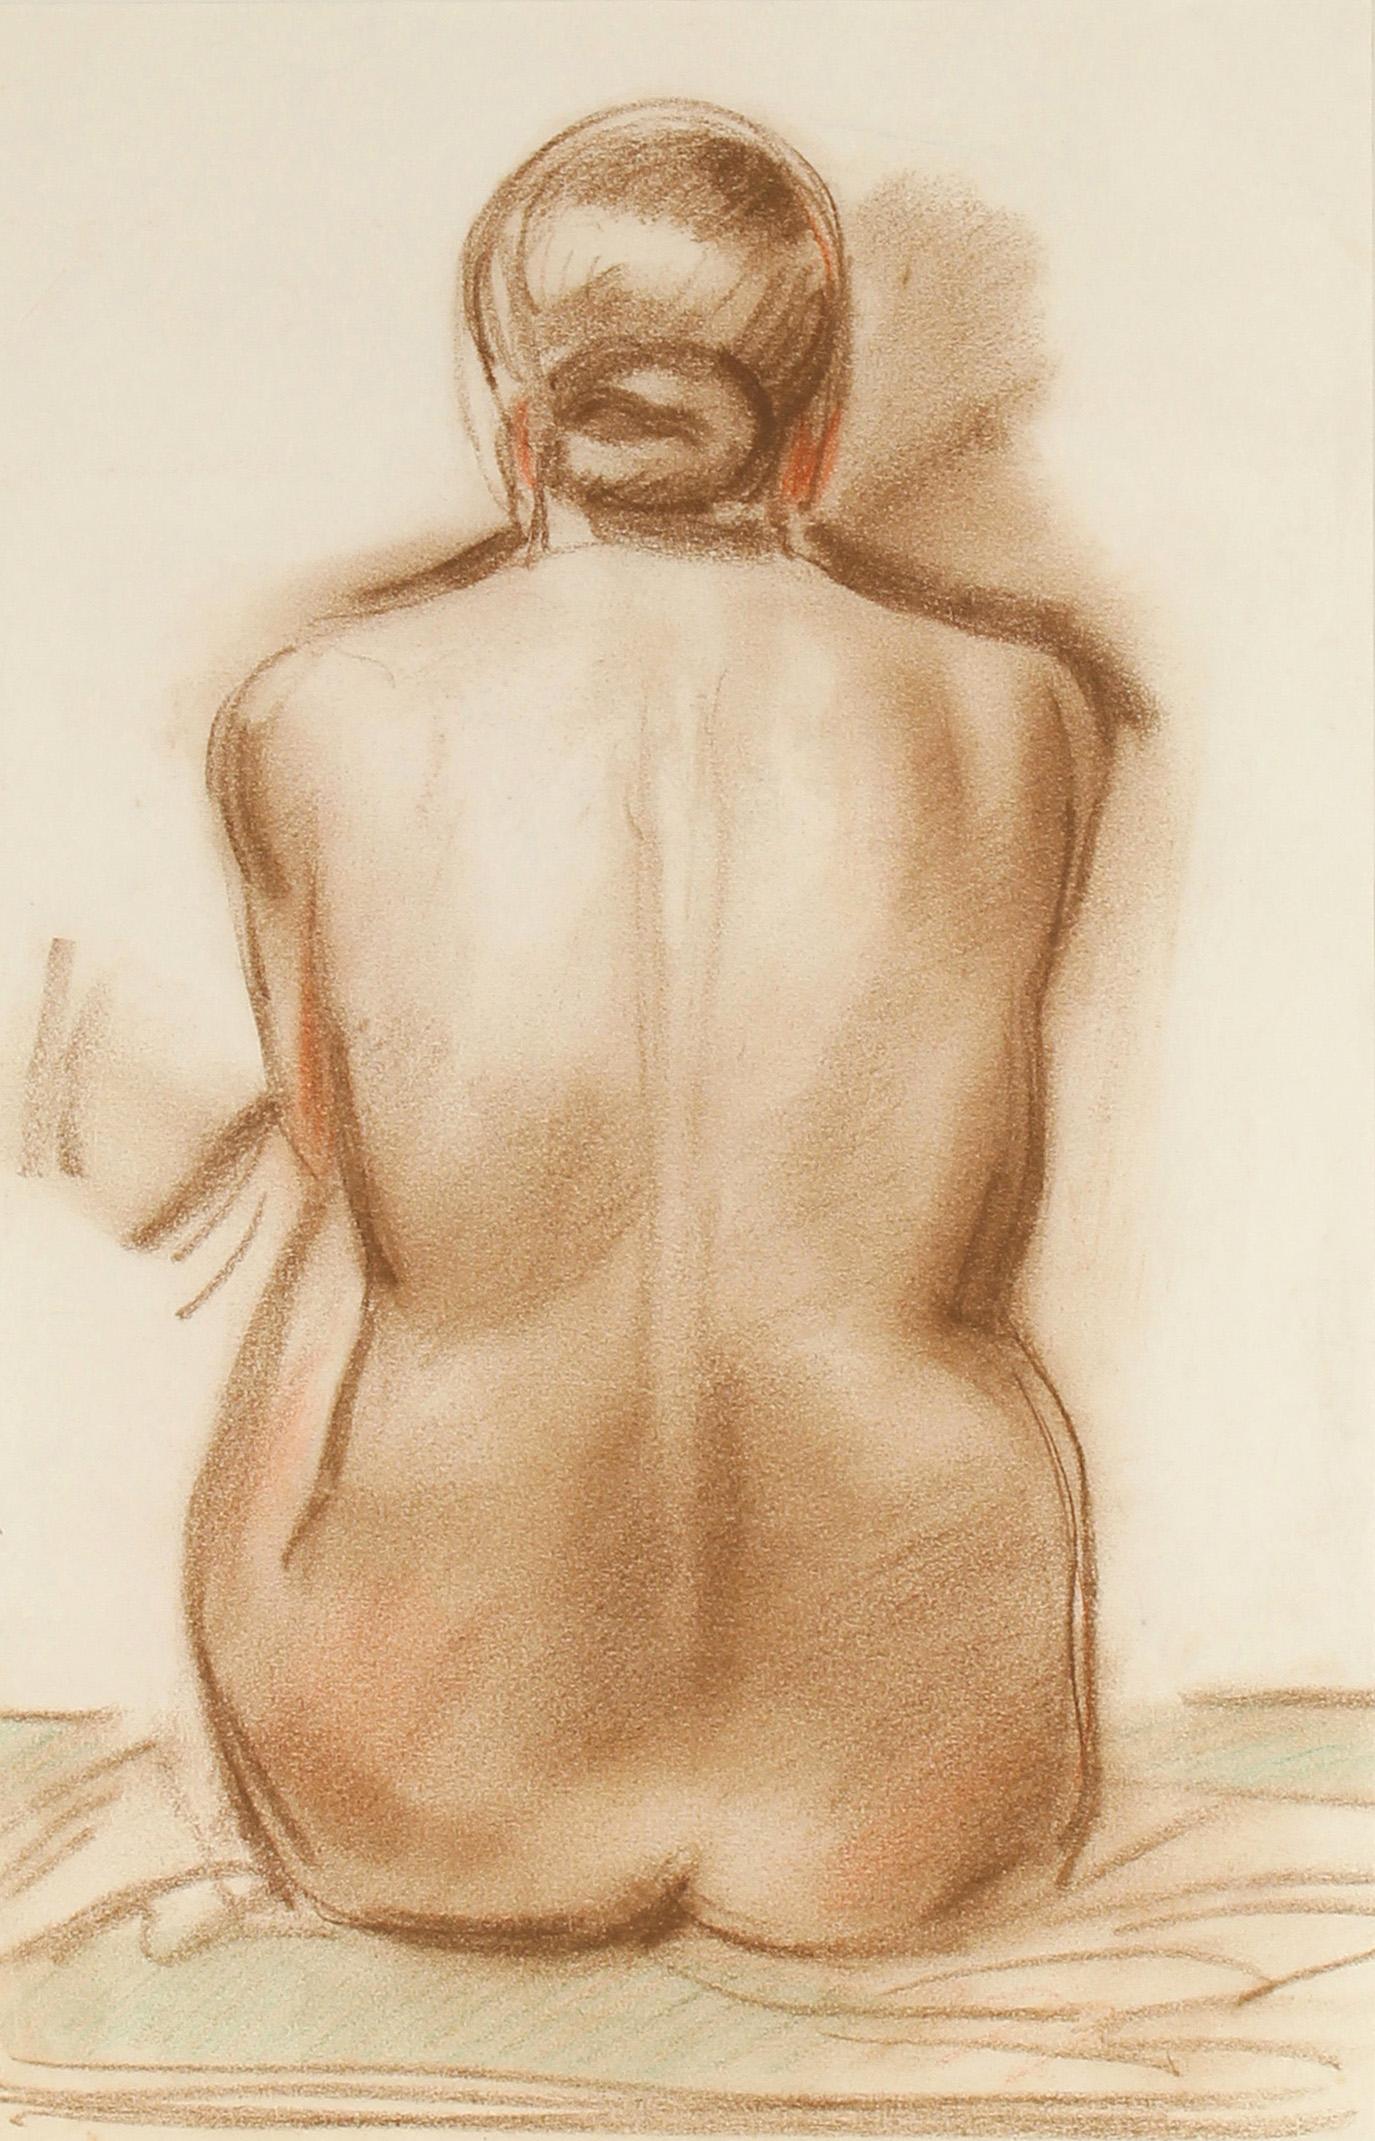 X - Female Nude Portrait in Pastel, Mid 20th Century - Art by Forrest Hibbits